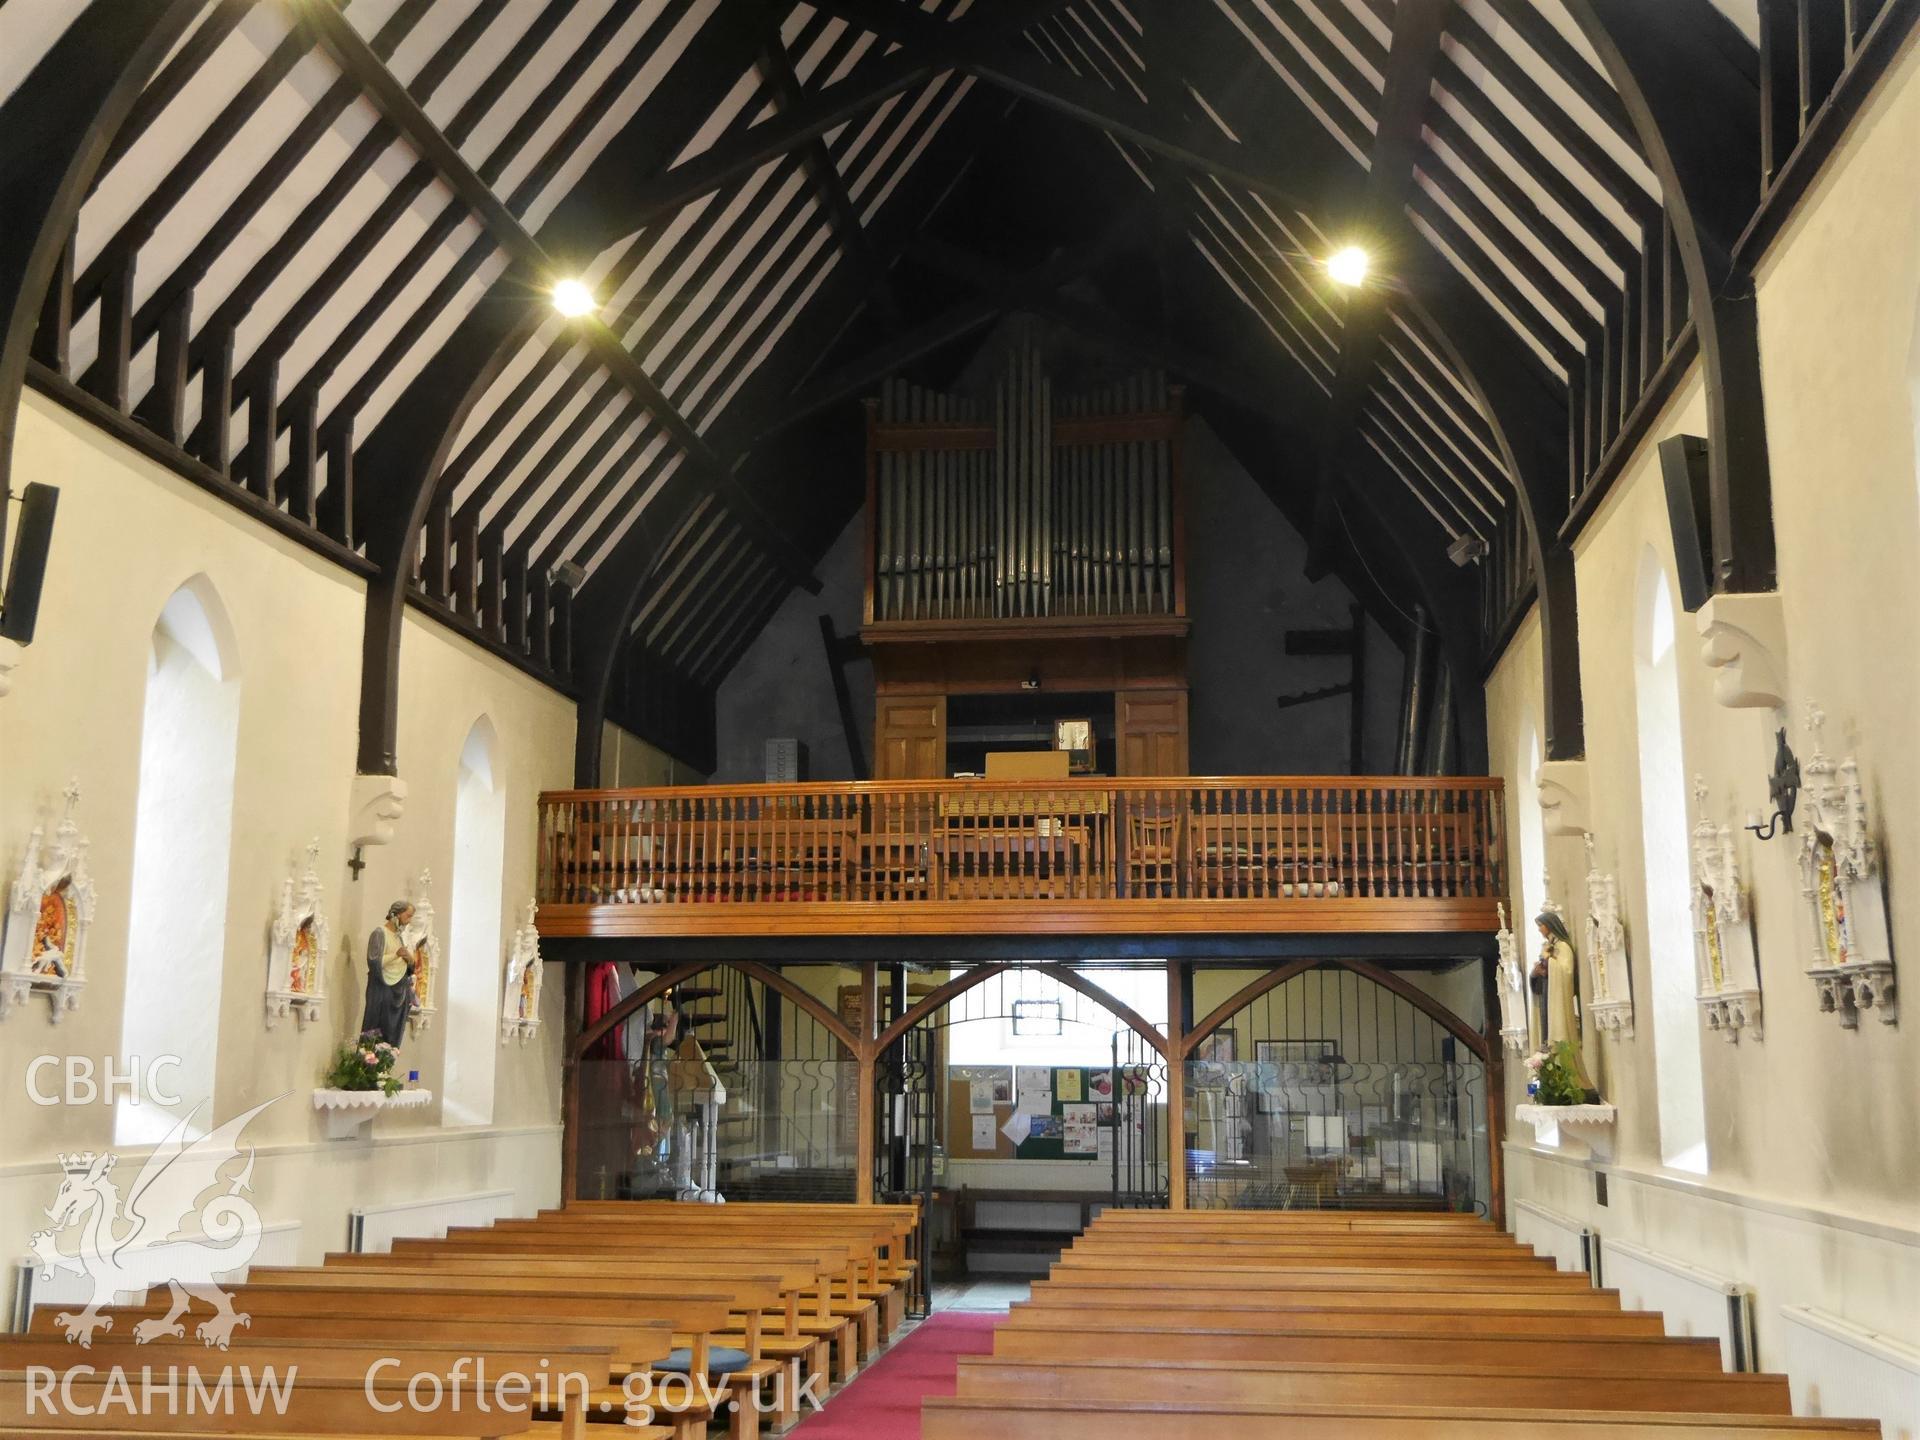 Digital colour photograph showing interior of St Michael's Catholic church, Brecon.